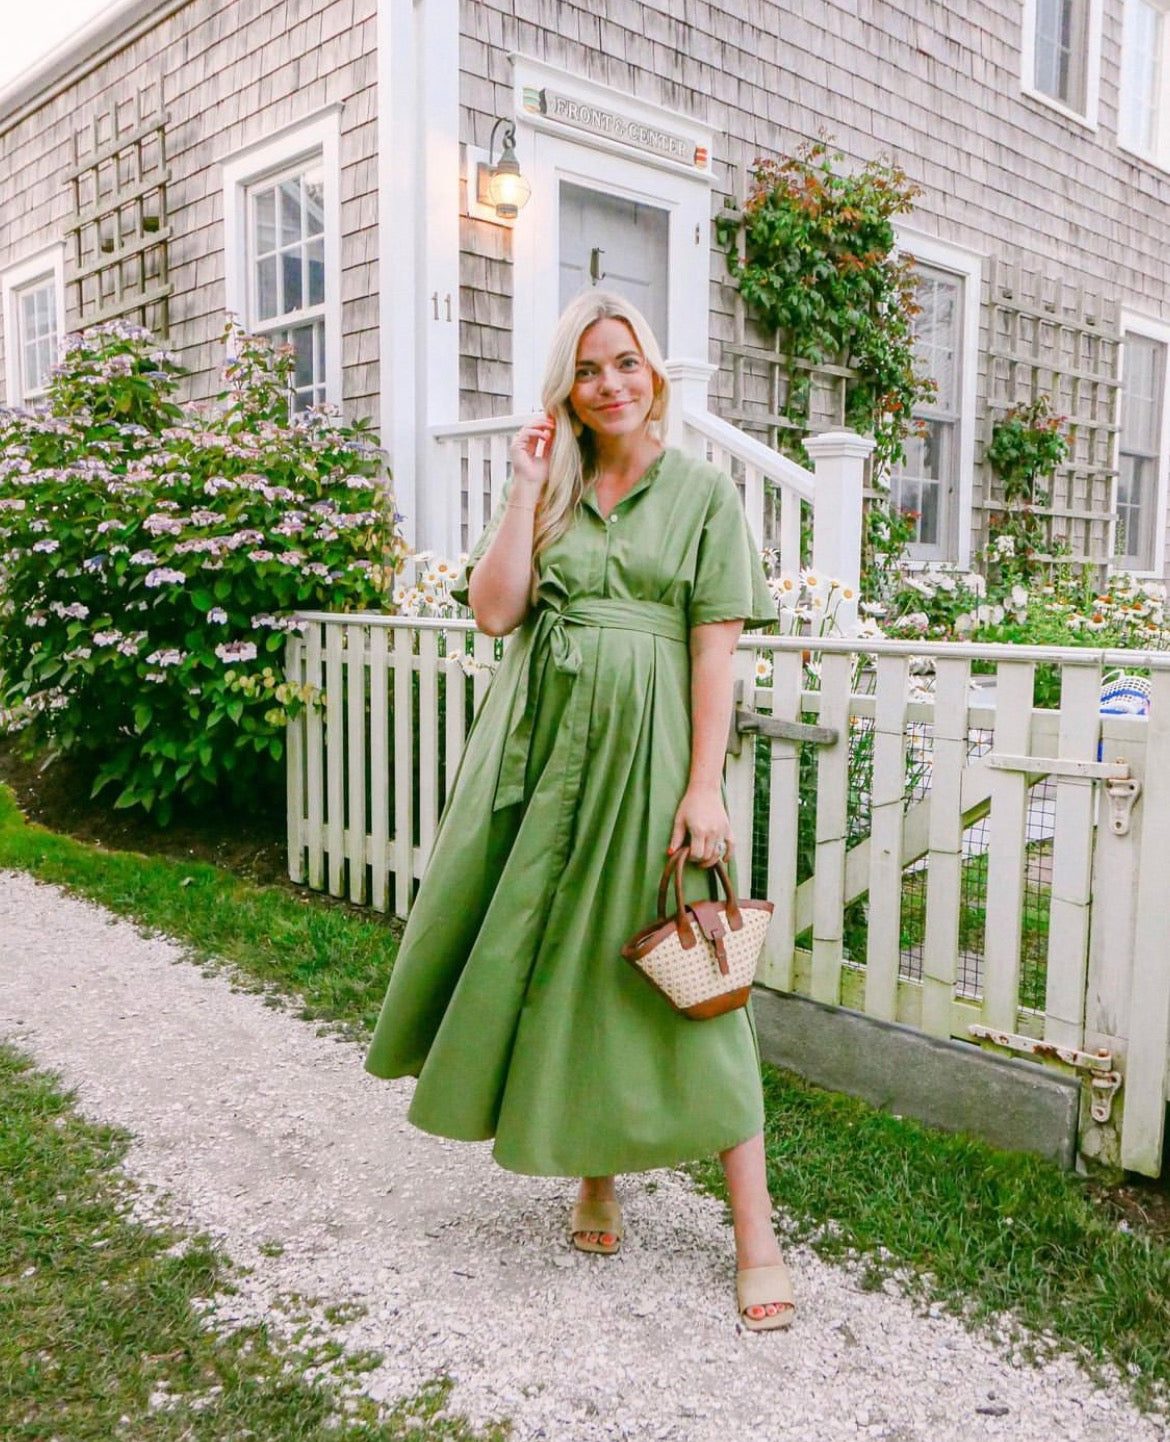 Blonde woman wearing green long dress standing in front of a white fenced house